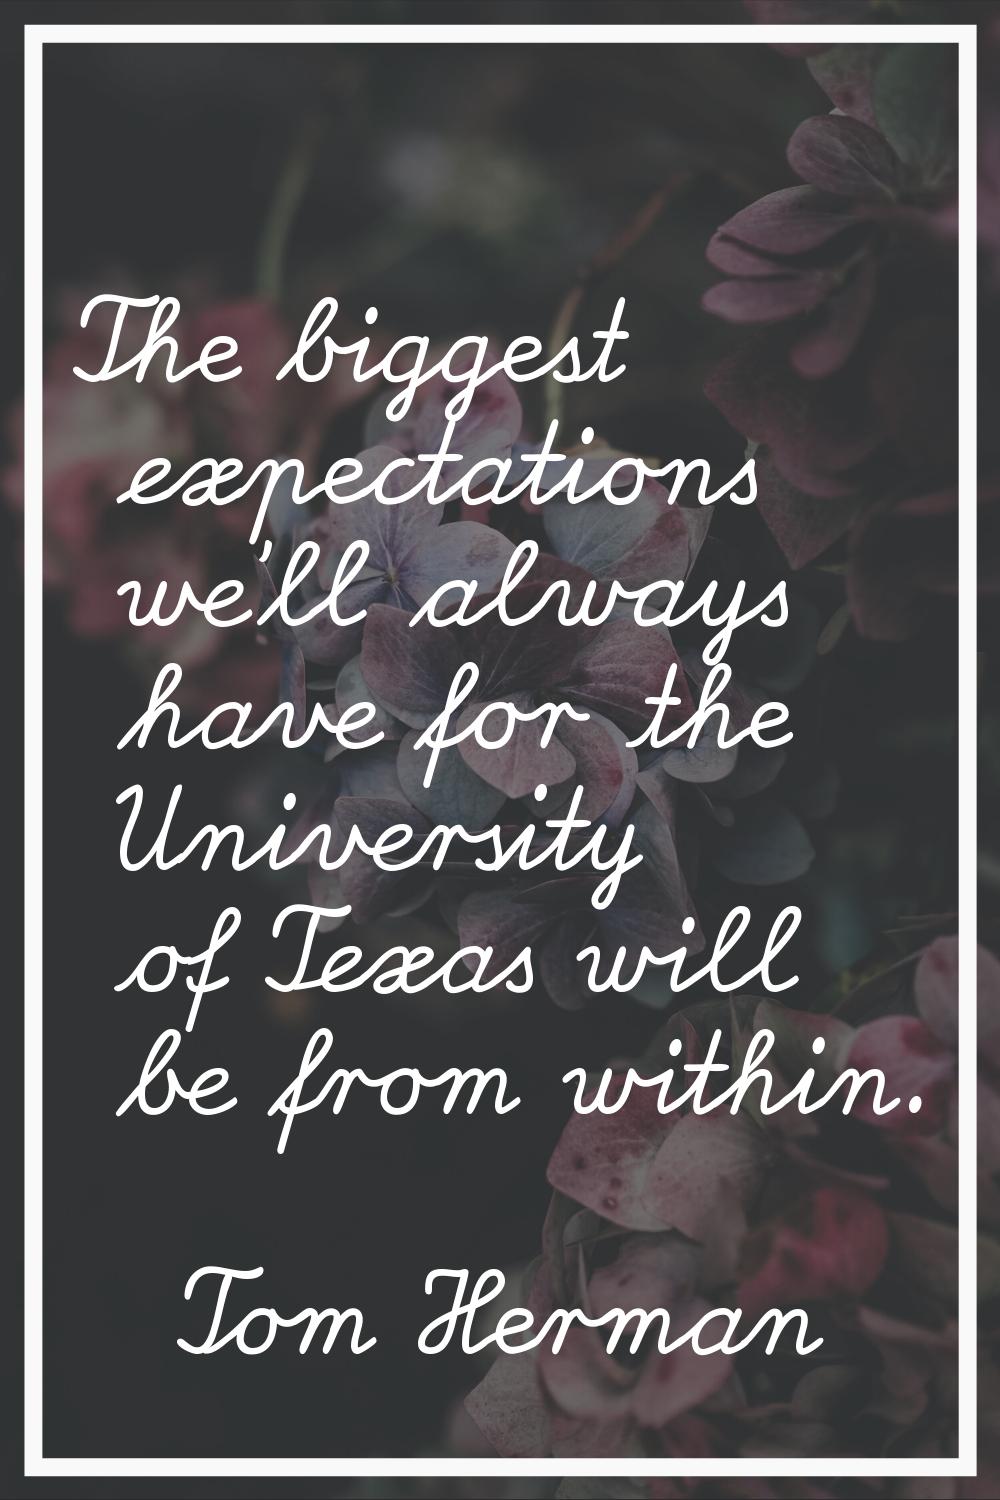 The biggest expectations we'll always have for the University of Texas will be from within.